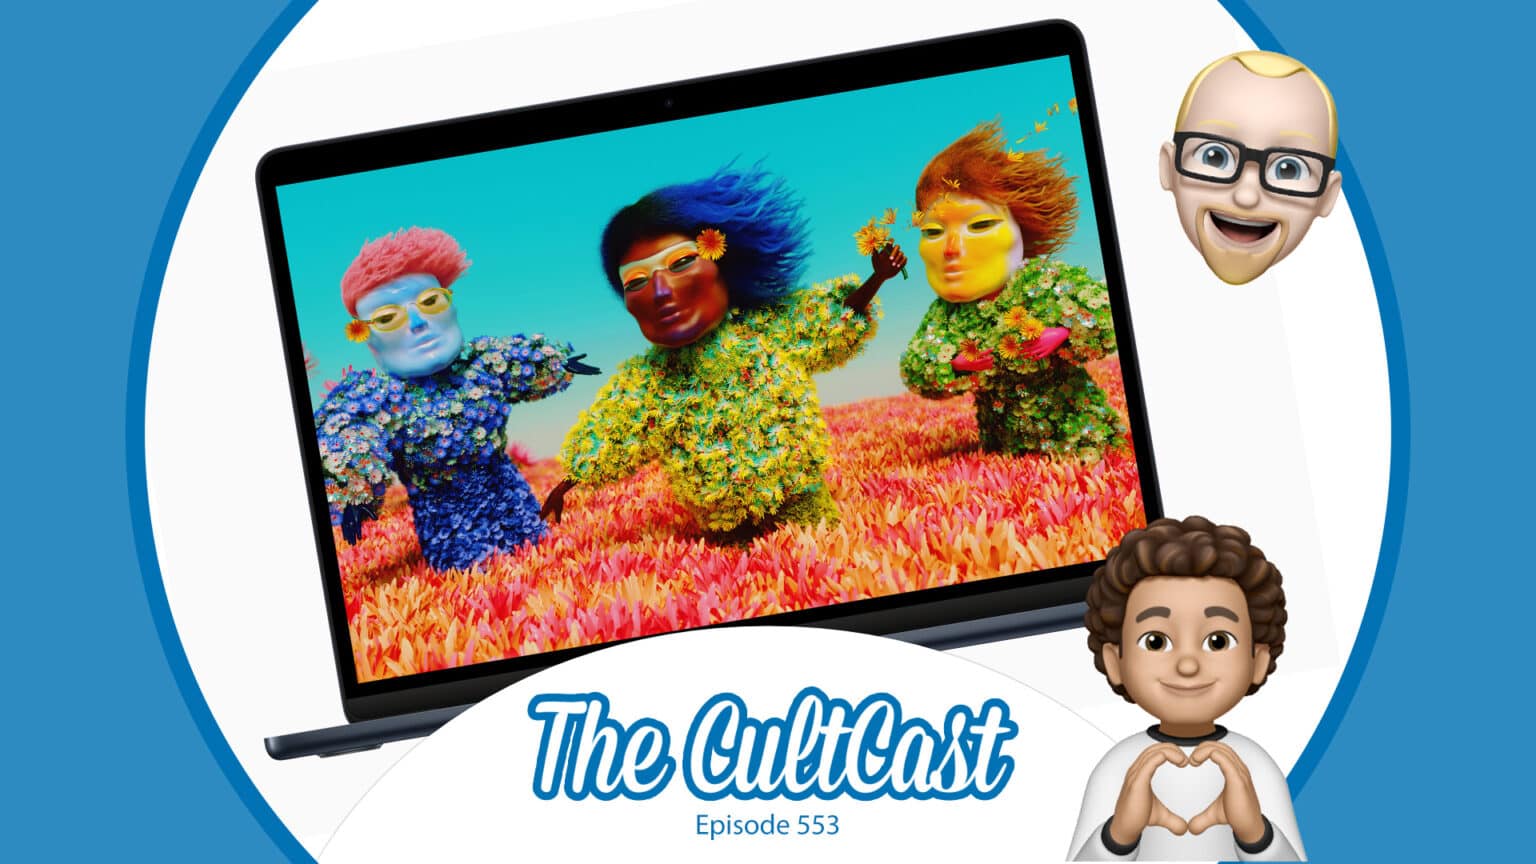 The CultCast Apple podcast: Nobody's got anything bad to say about the new MacBook Air.